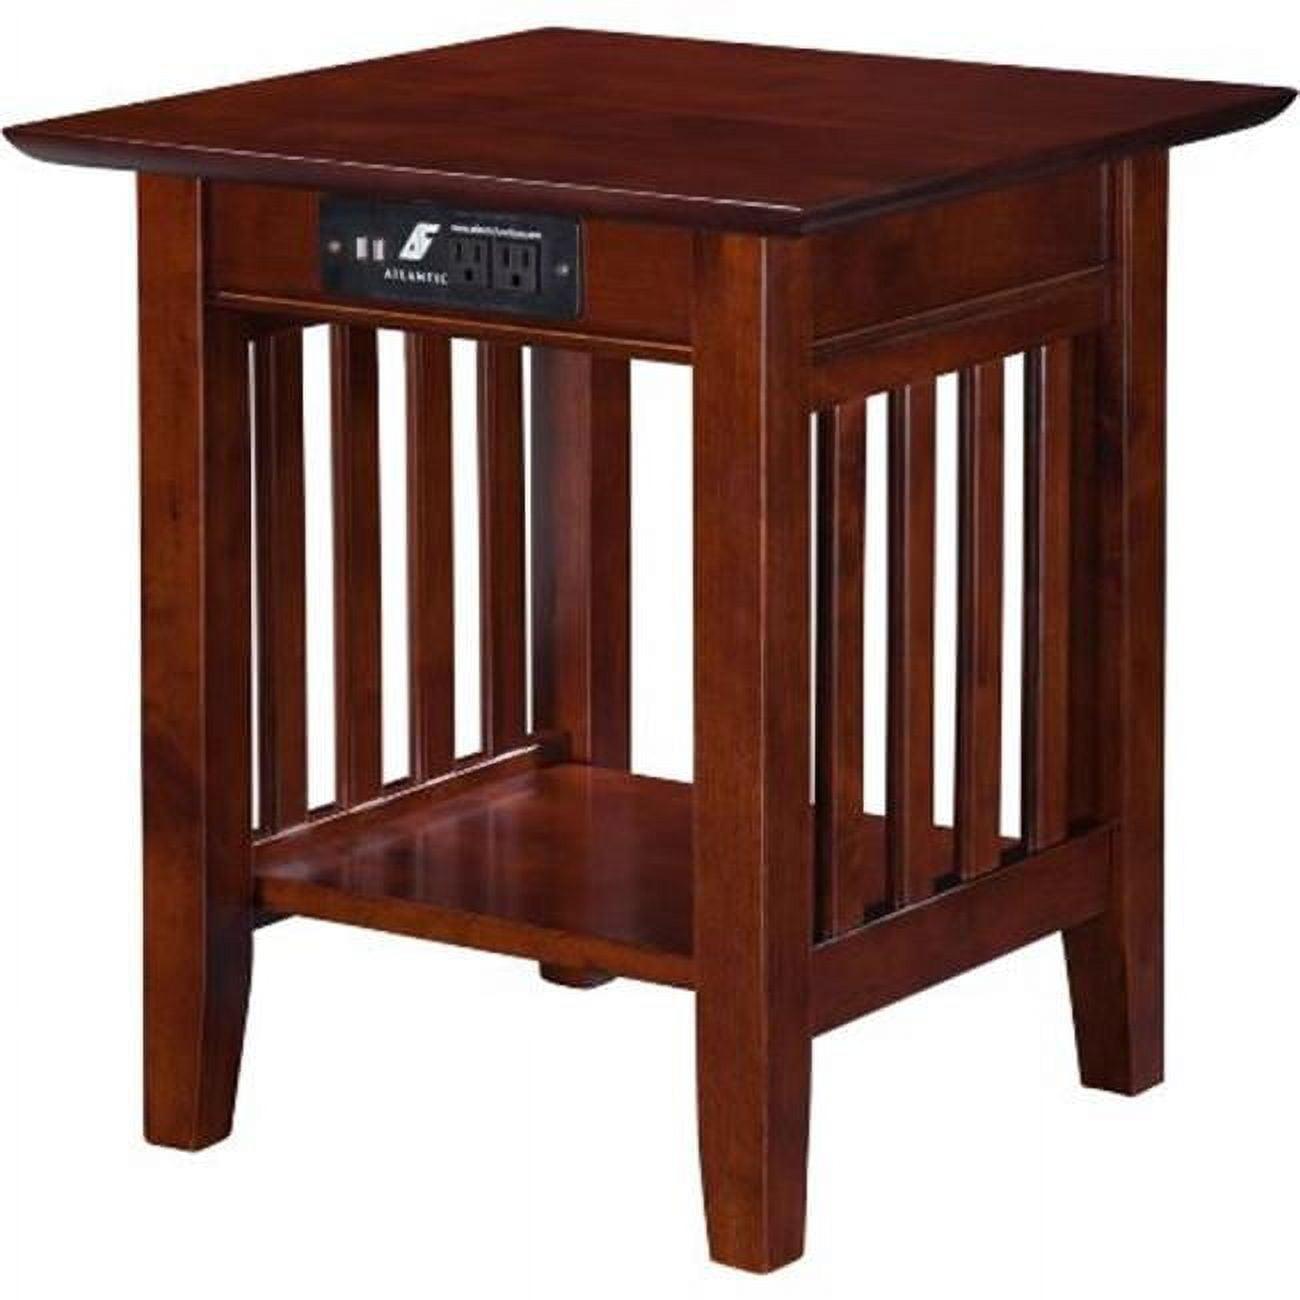 Mission Walnut Square End Table with USB and Power Outlets